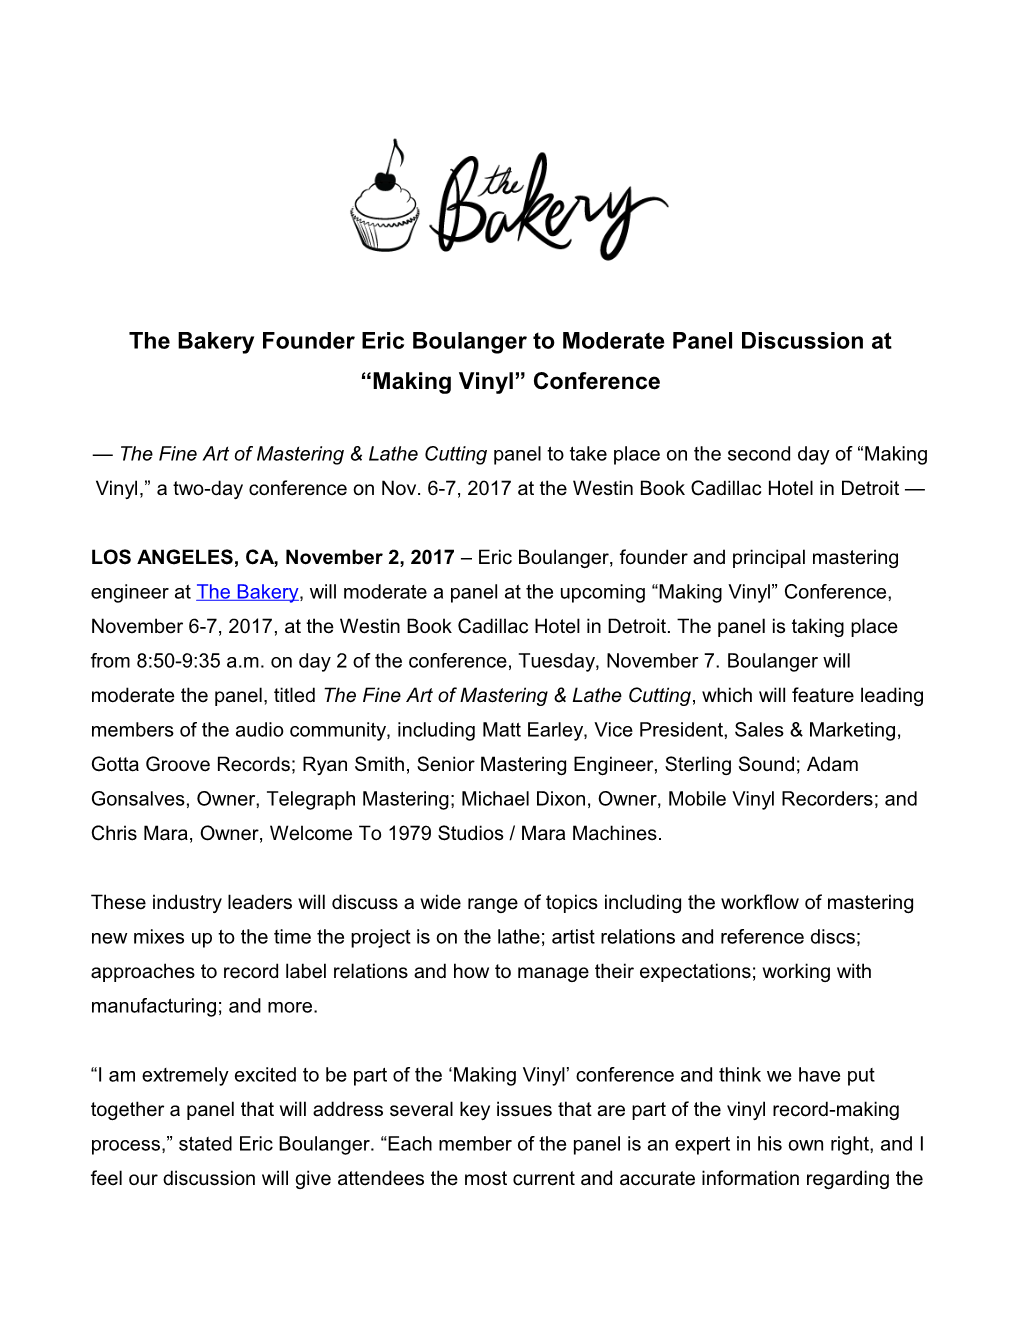 The Bakery Founder Eric Boulanger to Moderate Panel Discussion at Making Vinyl Conference